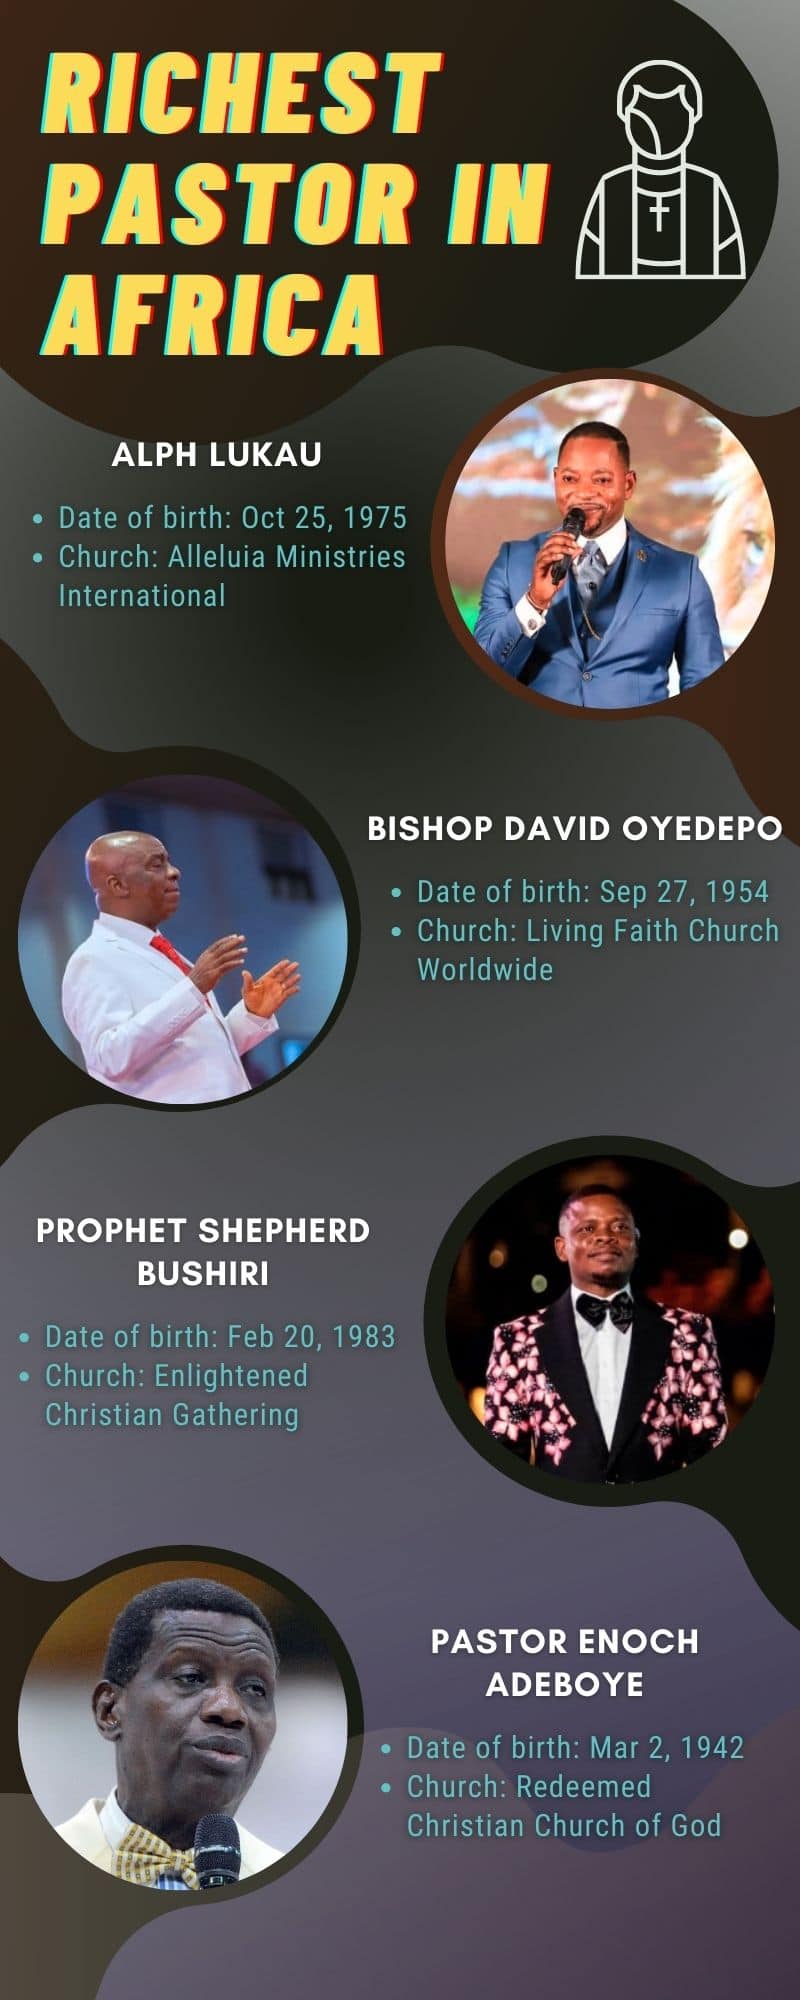 Who is the richest pastor in Africa